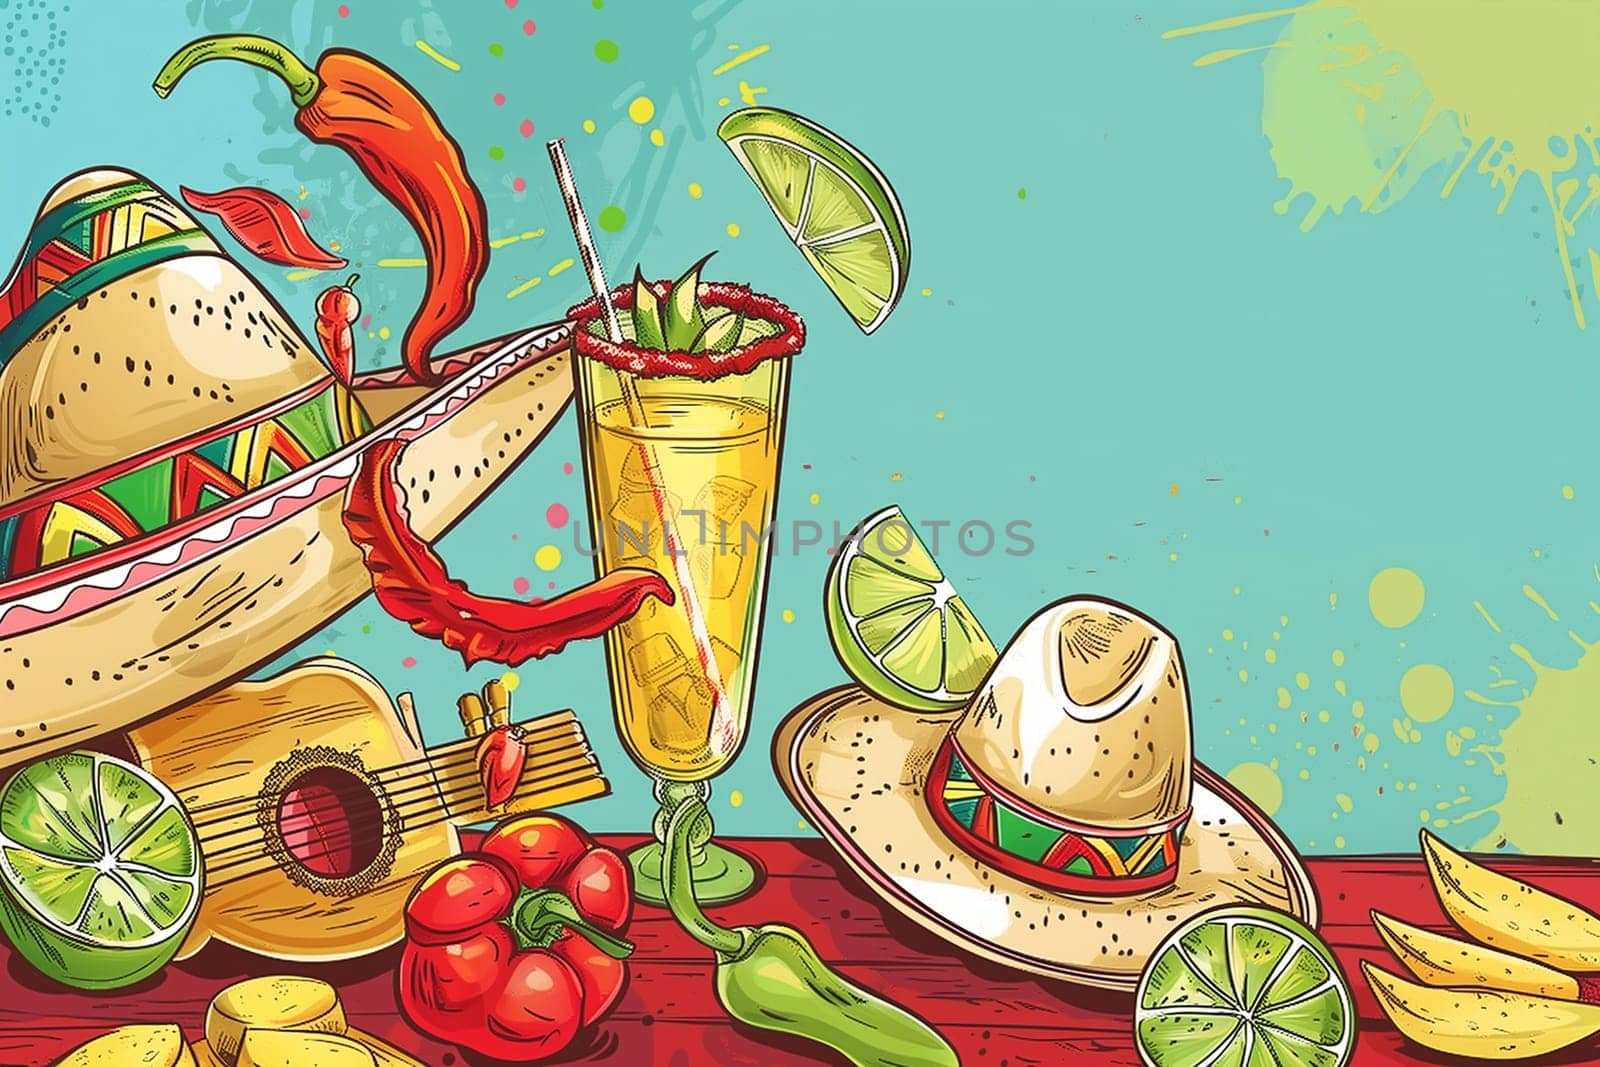 Mexican Food and Drinks Painting on Table by Sd28DimoN_1976